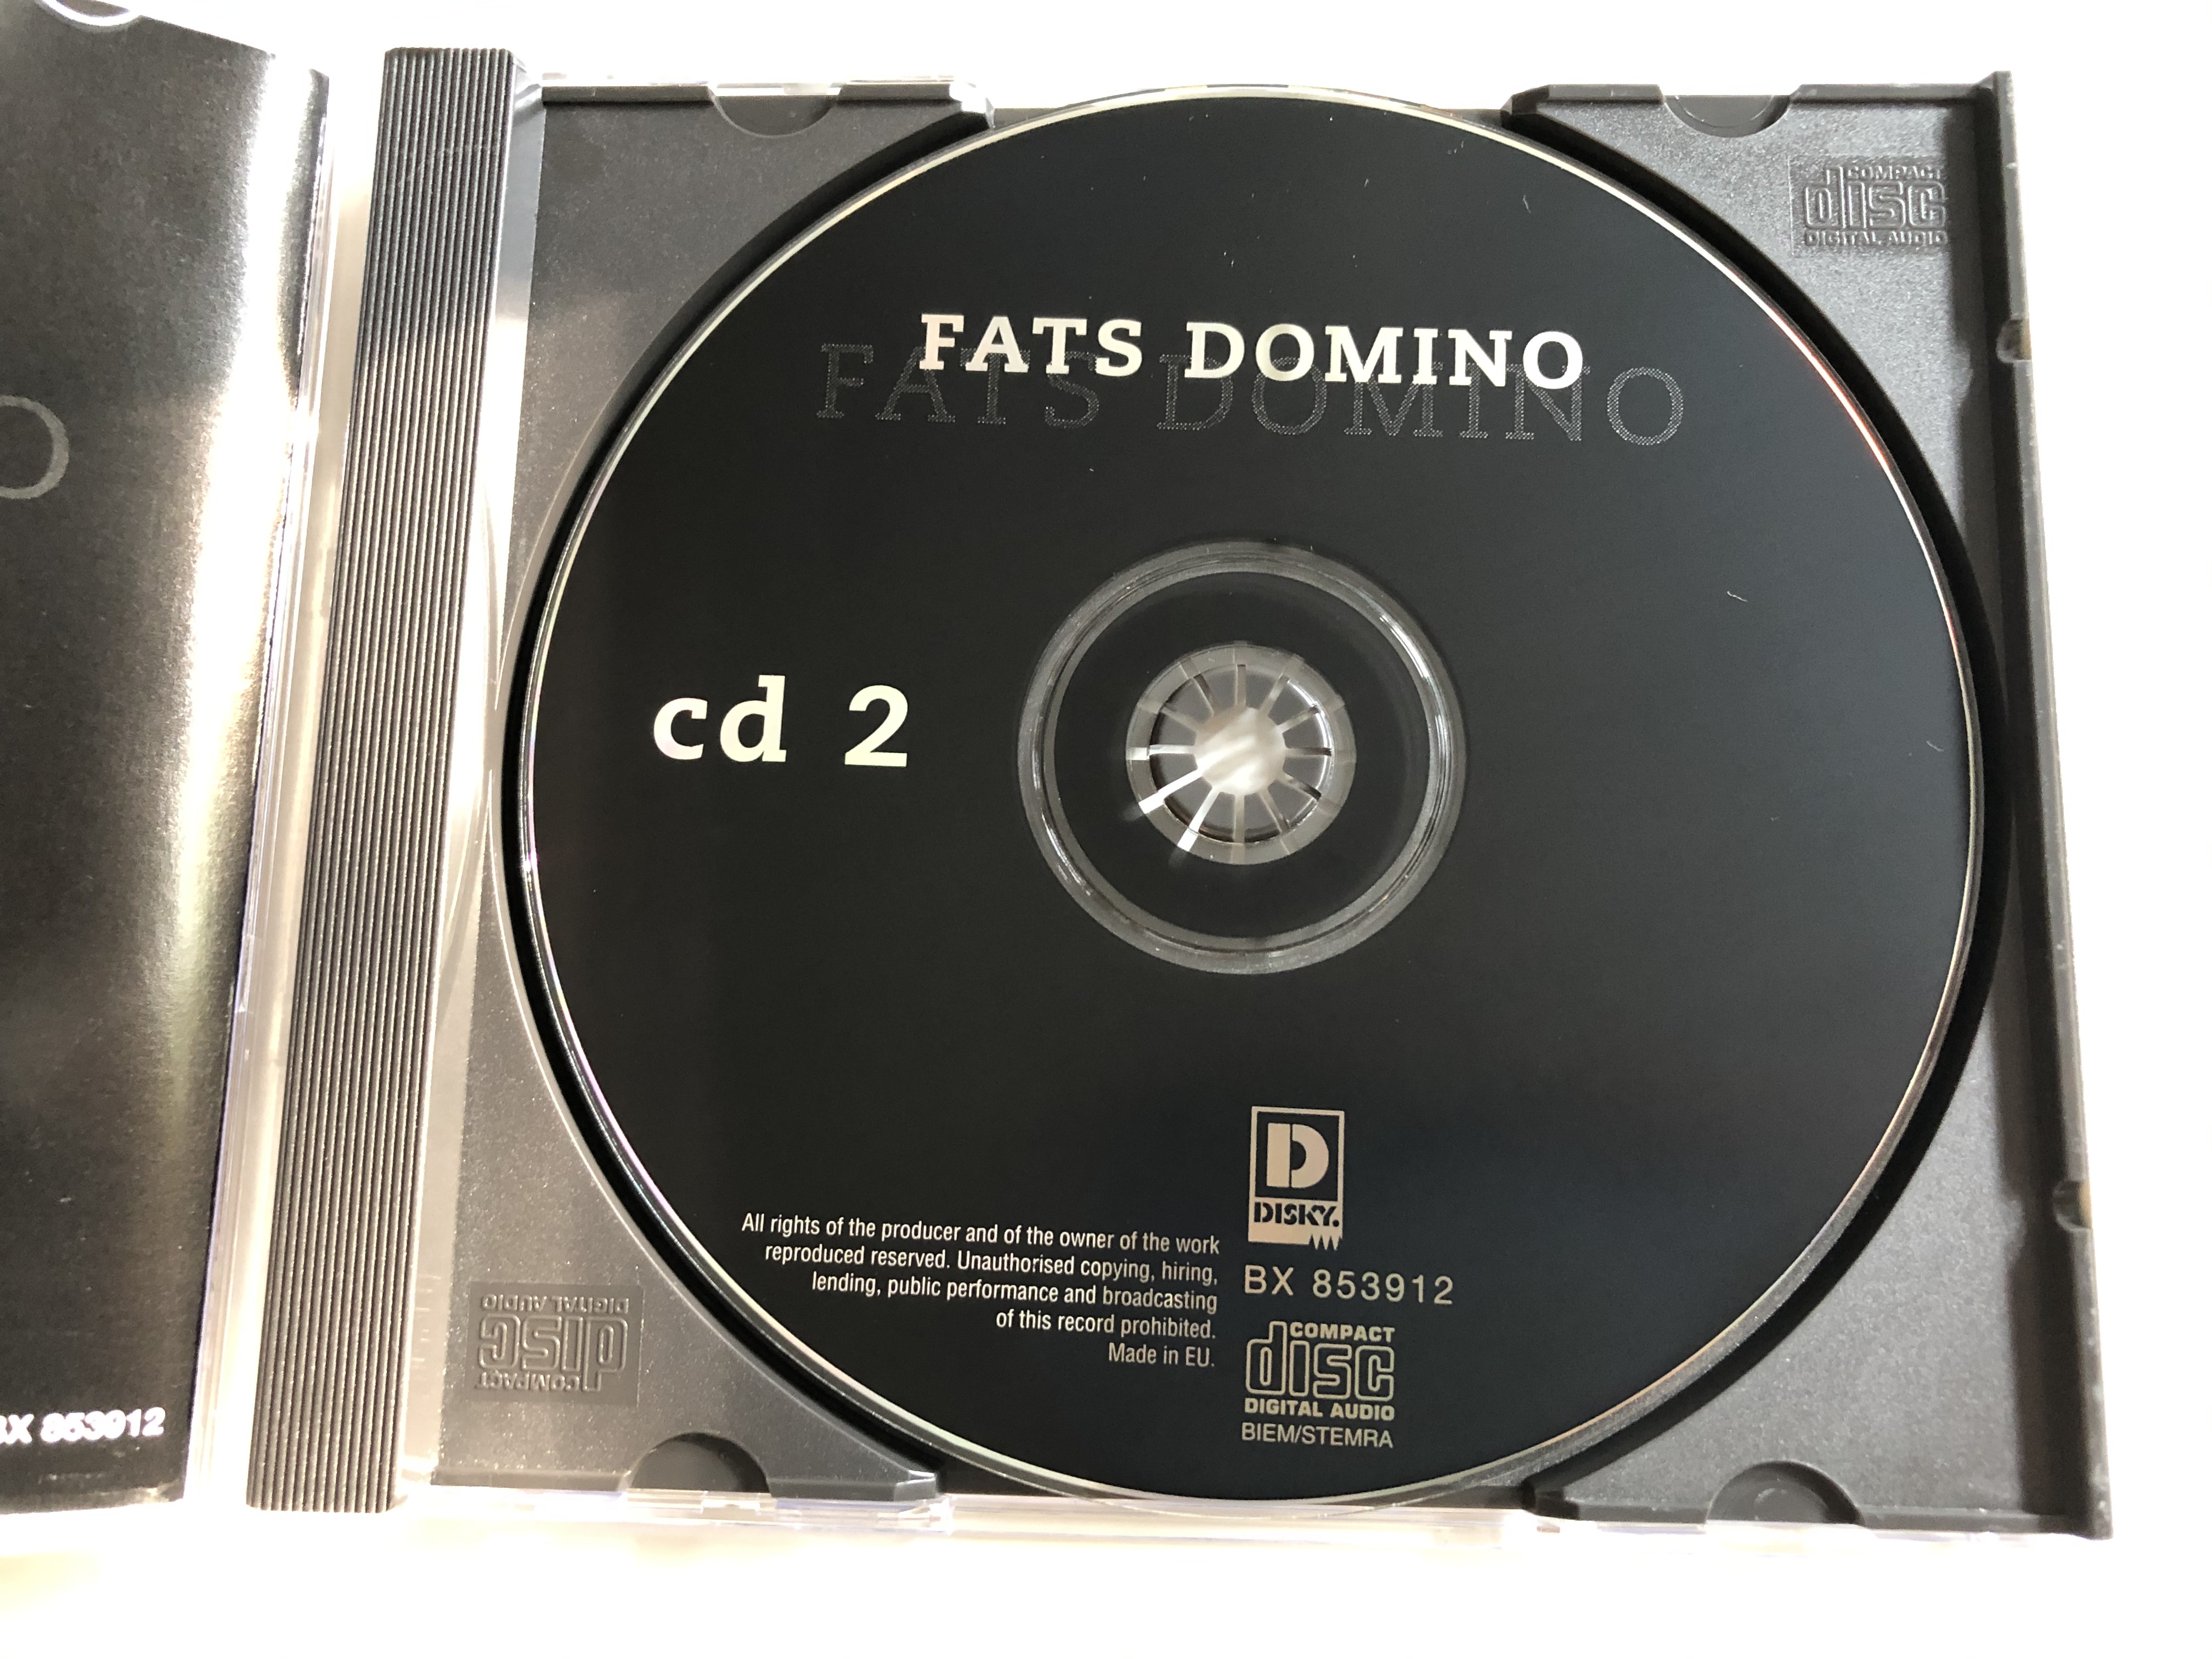 fats-domino-original-gold-cd-2-my-girl-josephine-red-sails-in-the-sunset-ain-t-that-a-shame-there-goes-my-heart-again-disky-audio-cd-1998-bx-853912-3-.jpg